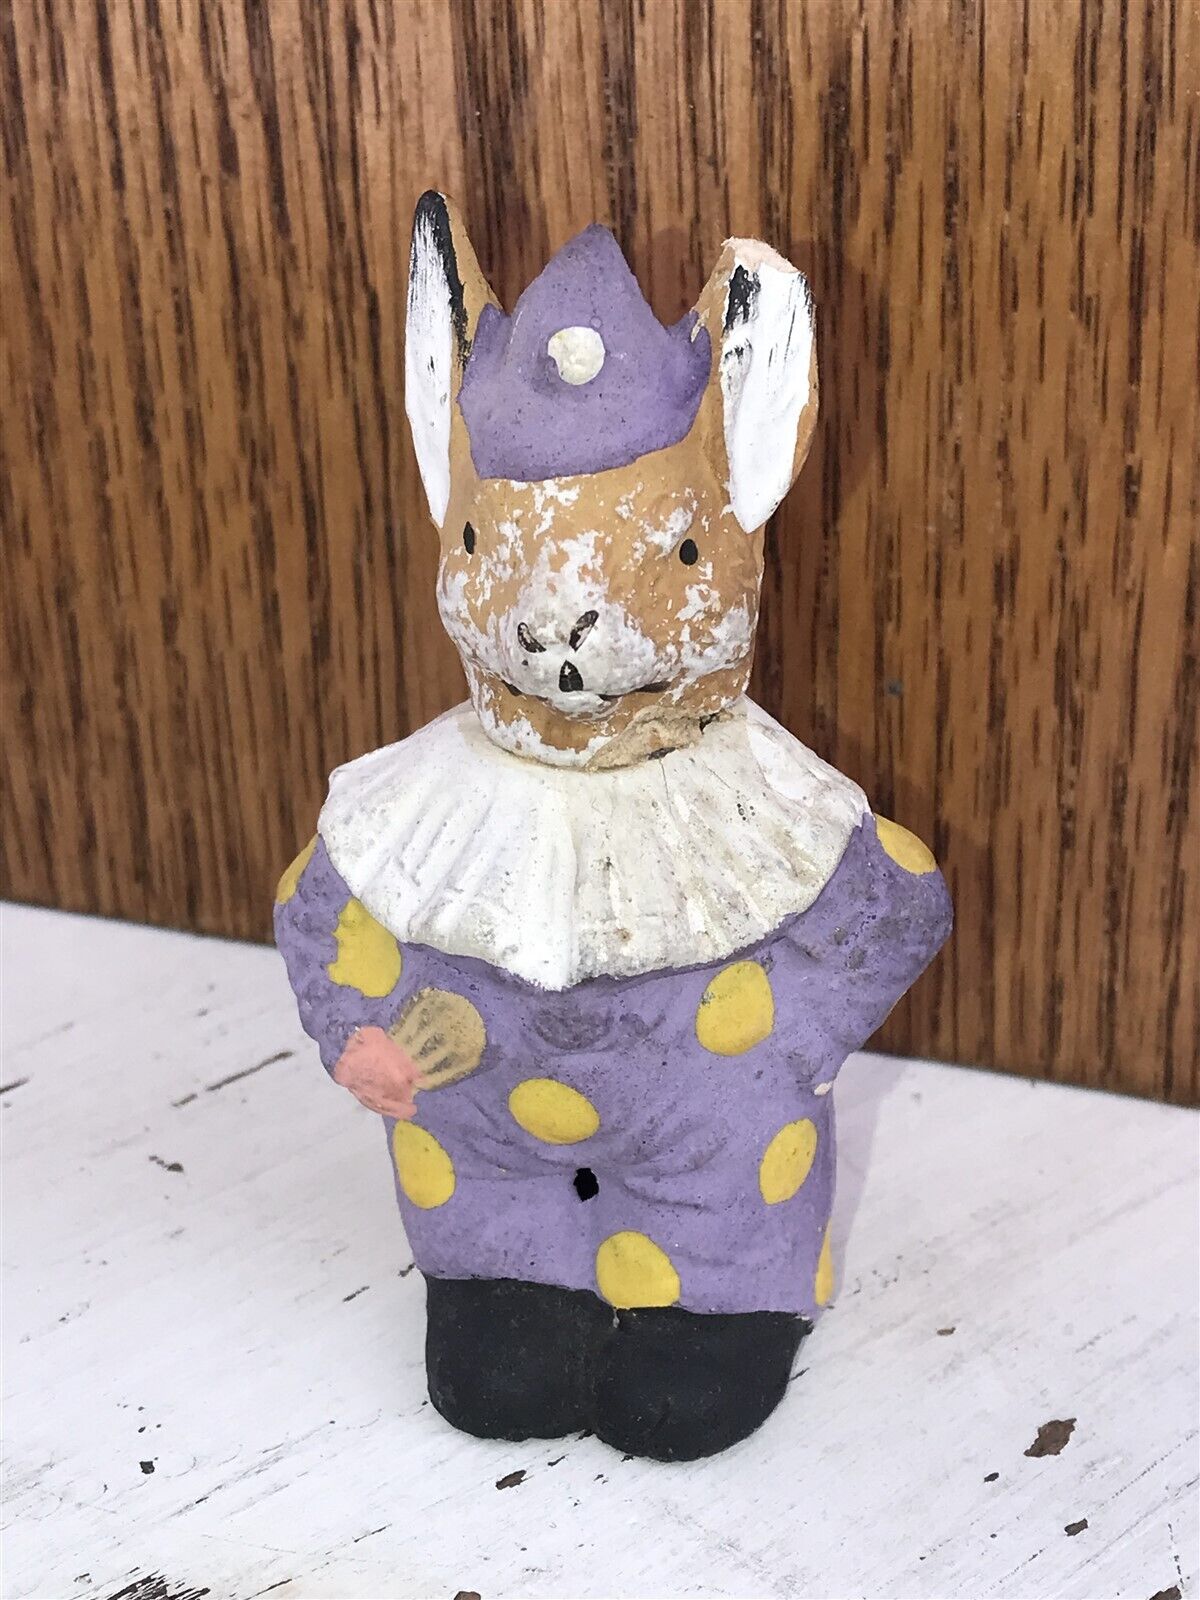 ANTIQUE PAPIER MACHE FIGURAL EASTER CANDY CONTAINER CLOWN BUNNY RABBIT GERMANY